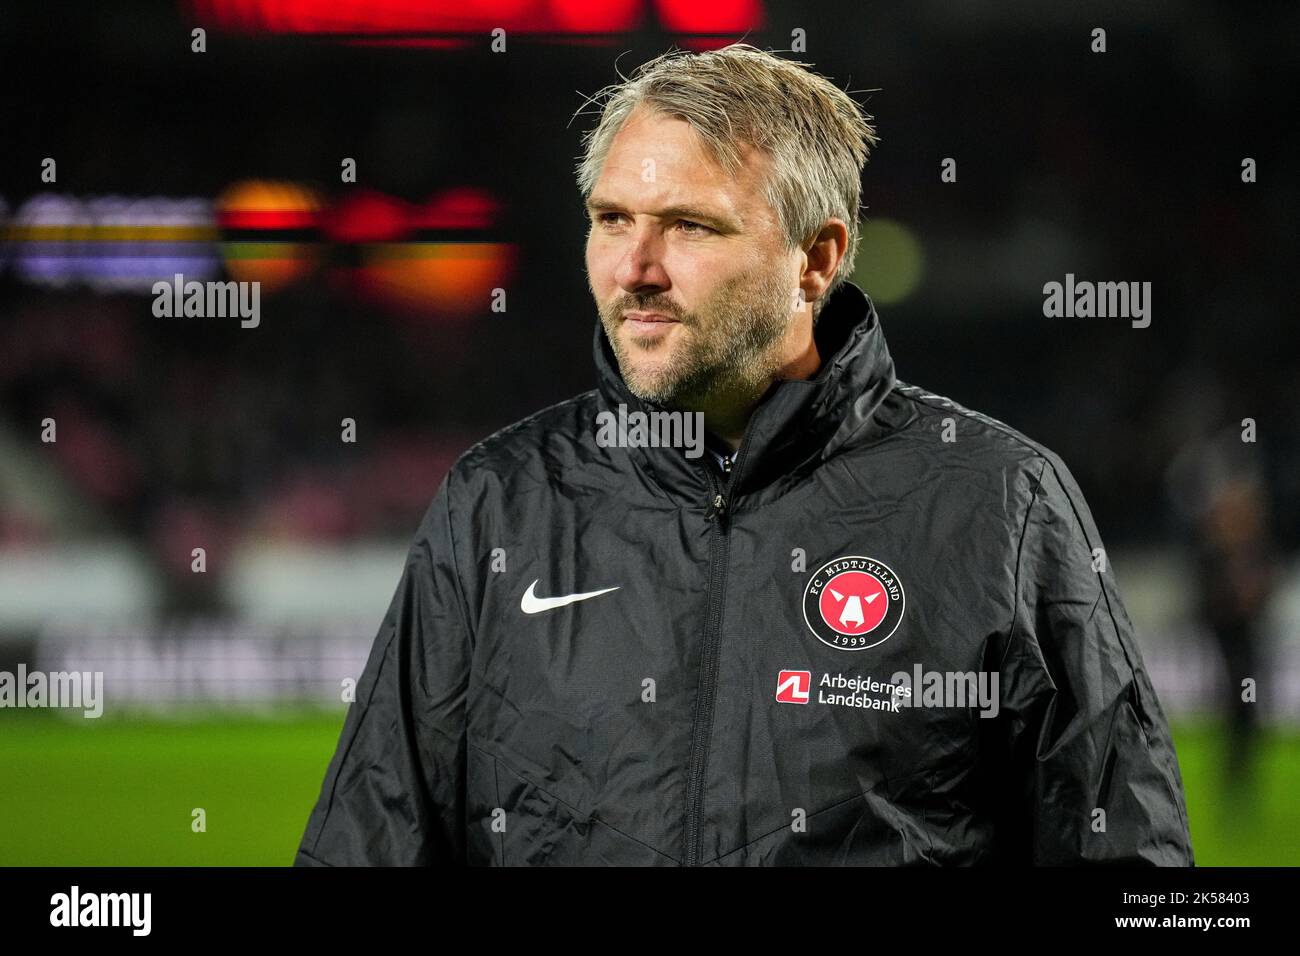 Herning - FC Midtjylland assistant trainer Michael Silberbauer during the match between FC Midtjylland v Feyenoord at MCH Arena on 6 October 2022 in Herning, Denmark. (Box to Box Pictures/Tom Bode) Stock Photo